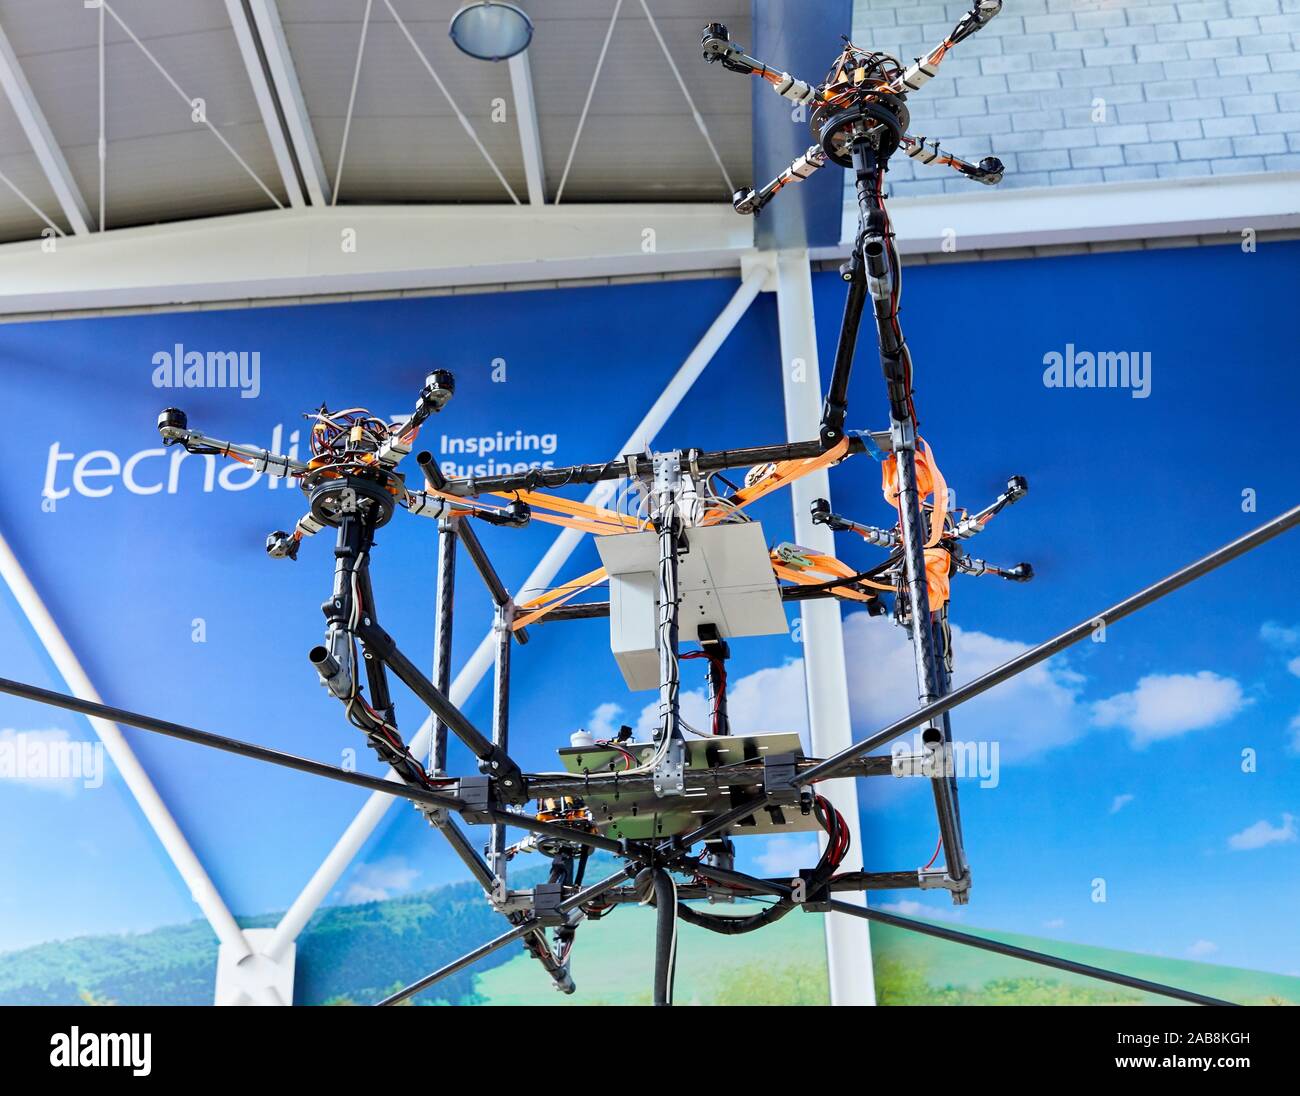 Drone research and development, Codisava project, Advanced distributed control for safety and energy efficiency of air transport, Aerospace Industry, Stock Photo